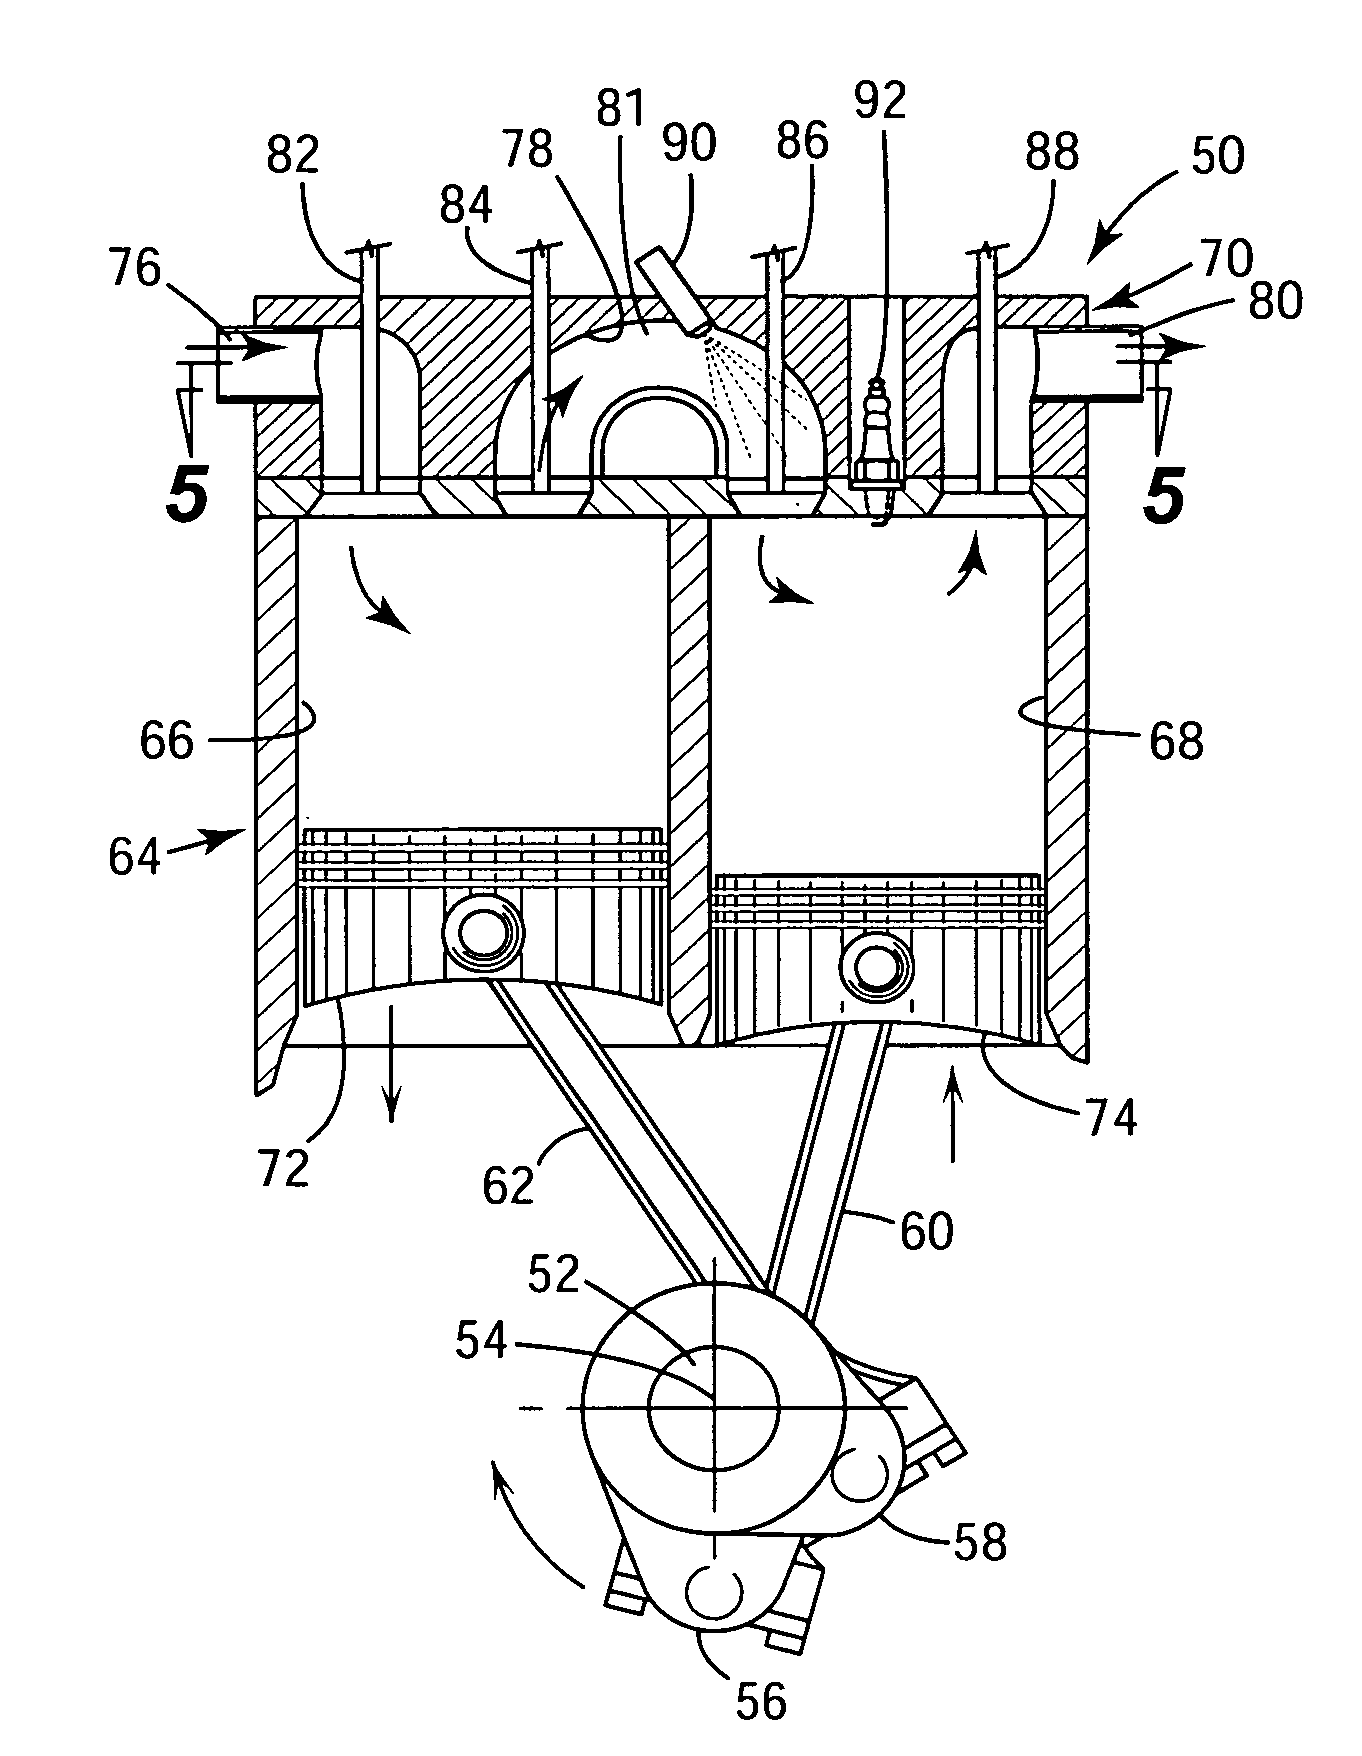 Split-cycle engine with early crossover compression valve opening